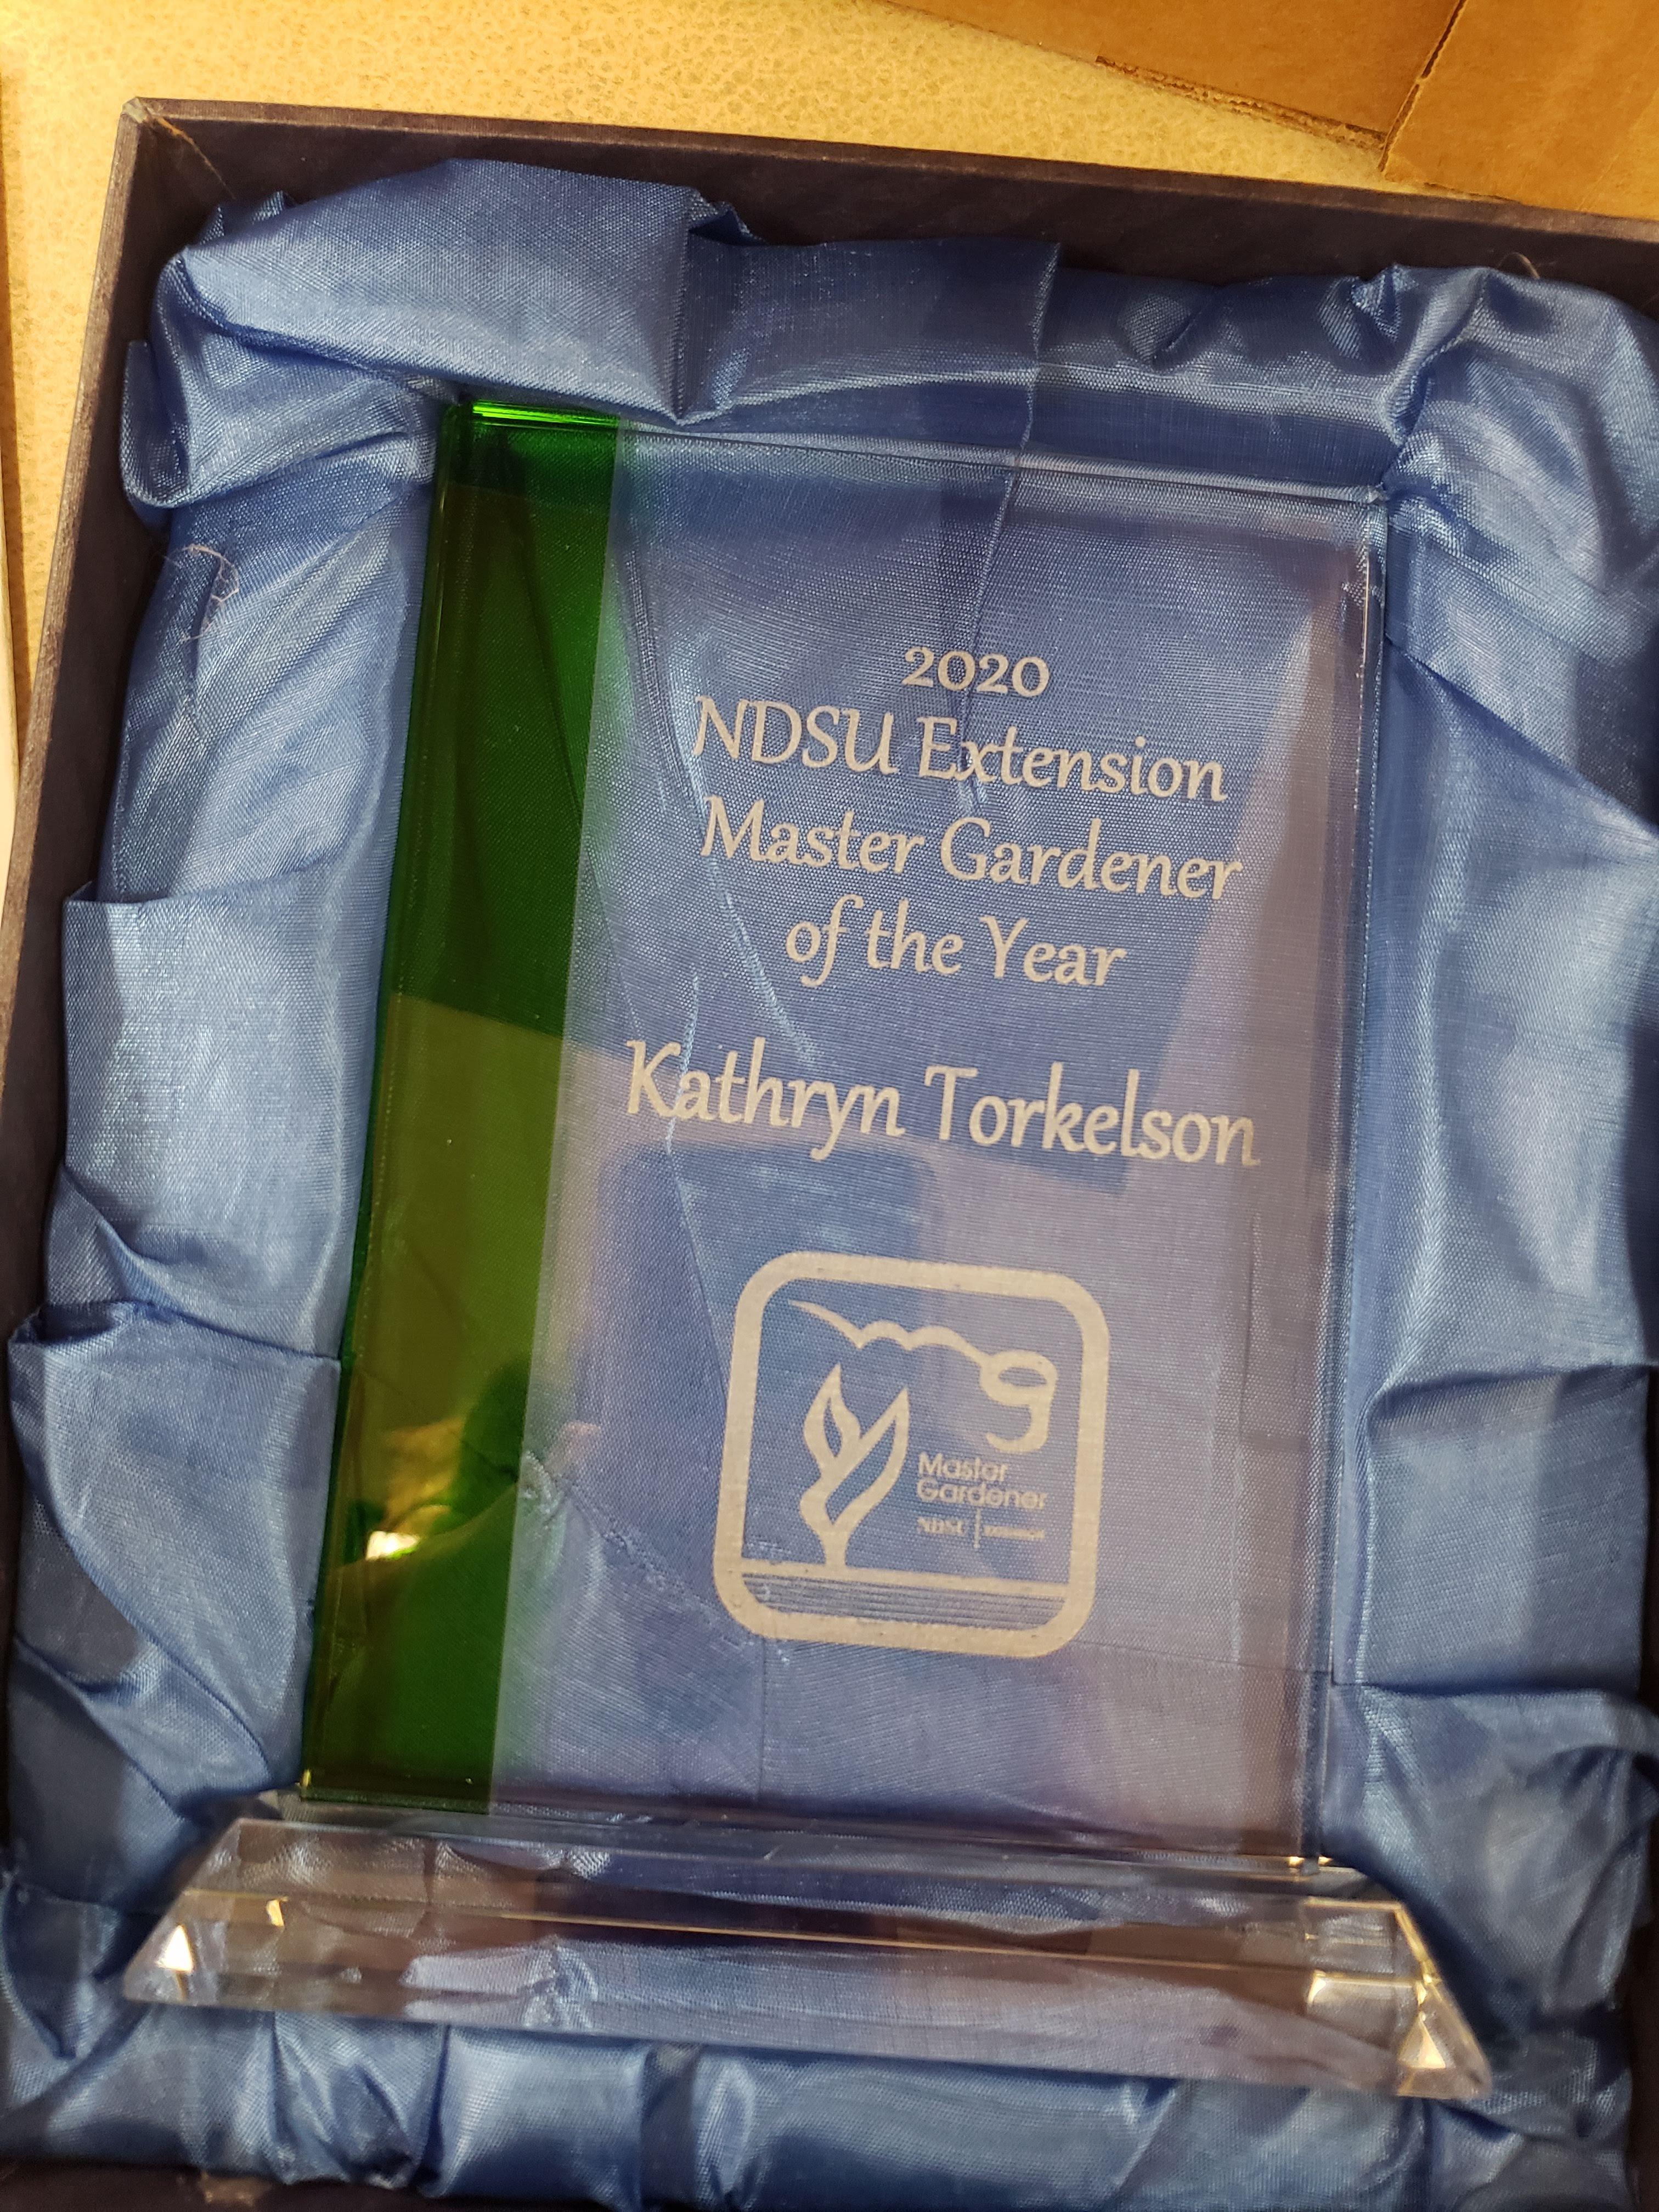 Kathryn Torkelson, Lansford, N.D., receives the Extension Master Gardener of the Year Award. (NDSU photo)